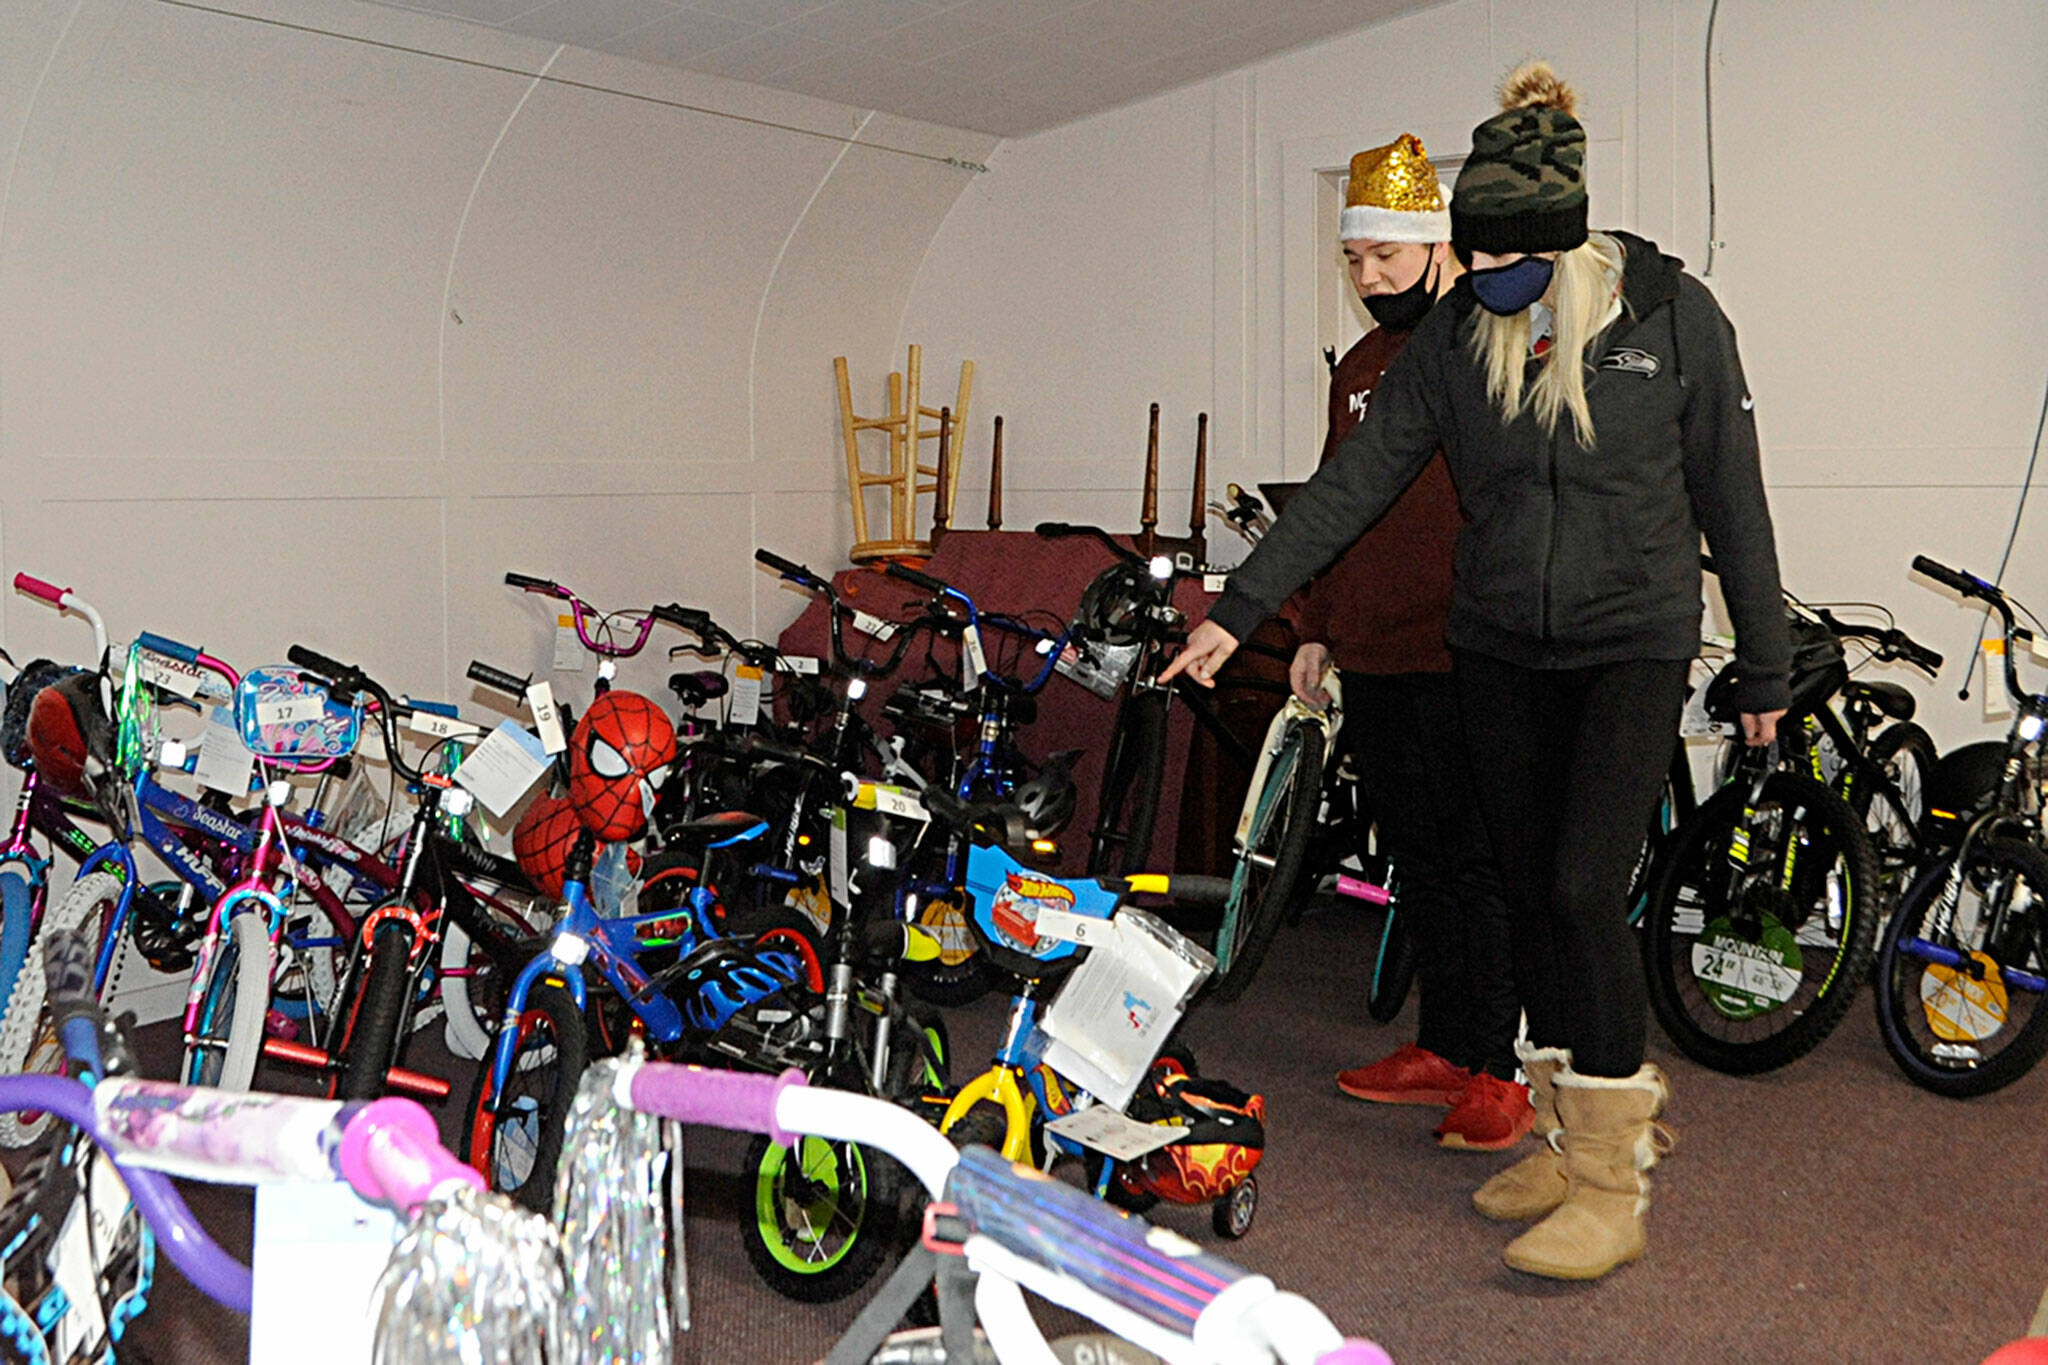 Brandy Brogan picks a bike out at Toys for Sequim Kids with help from volunteer Ryan Cherry, a Church of Jesus Christ of Latter-day Saints missionary, for a chance to receive one of 34 bikes in Sequim Community Aid’s raffle. Sequim Gazette photo by Matthew Nash